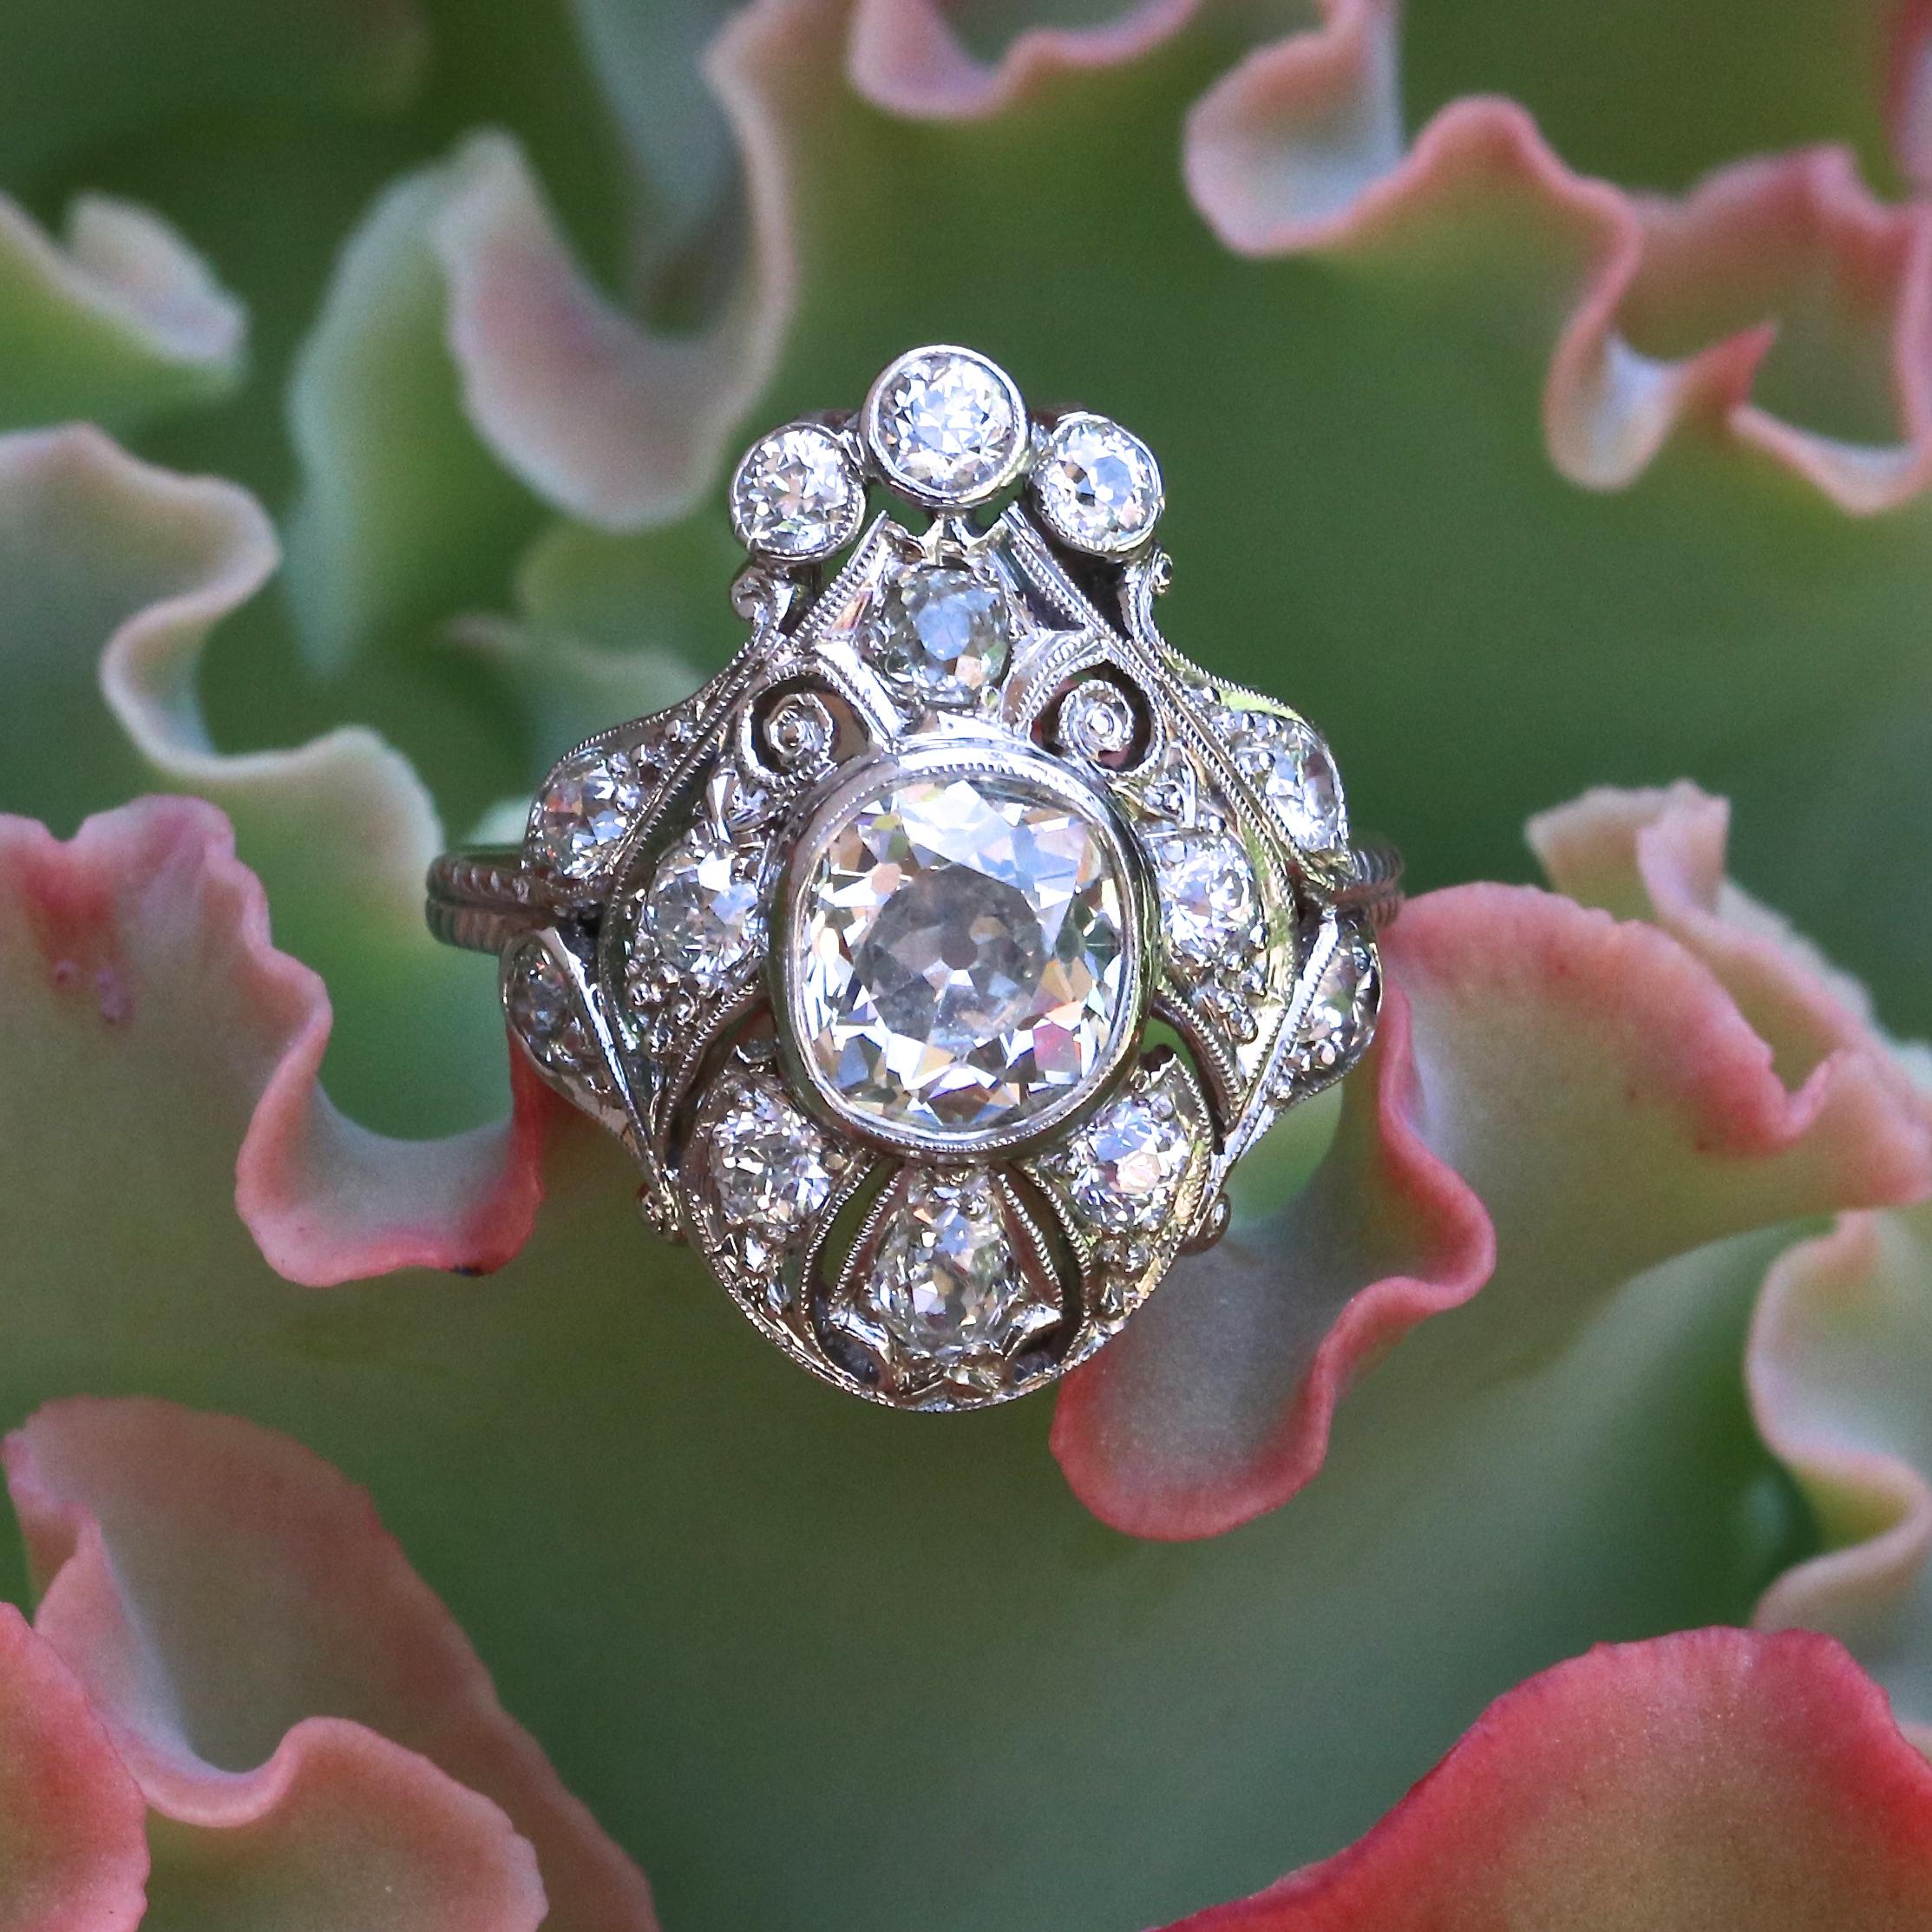 A regal ring from the Victorian era. Our love affair should last this long. Featuring an approximately 2.00 carat old mine cut diamond graded as L color, SI2 clarity. Surrounded by numerous old European cut diamonds weighing approximately  0.50